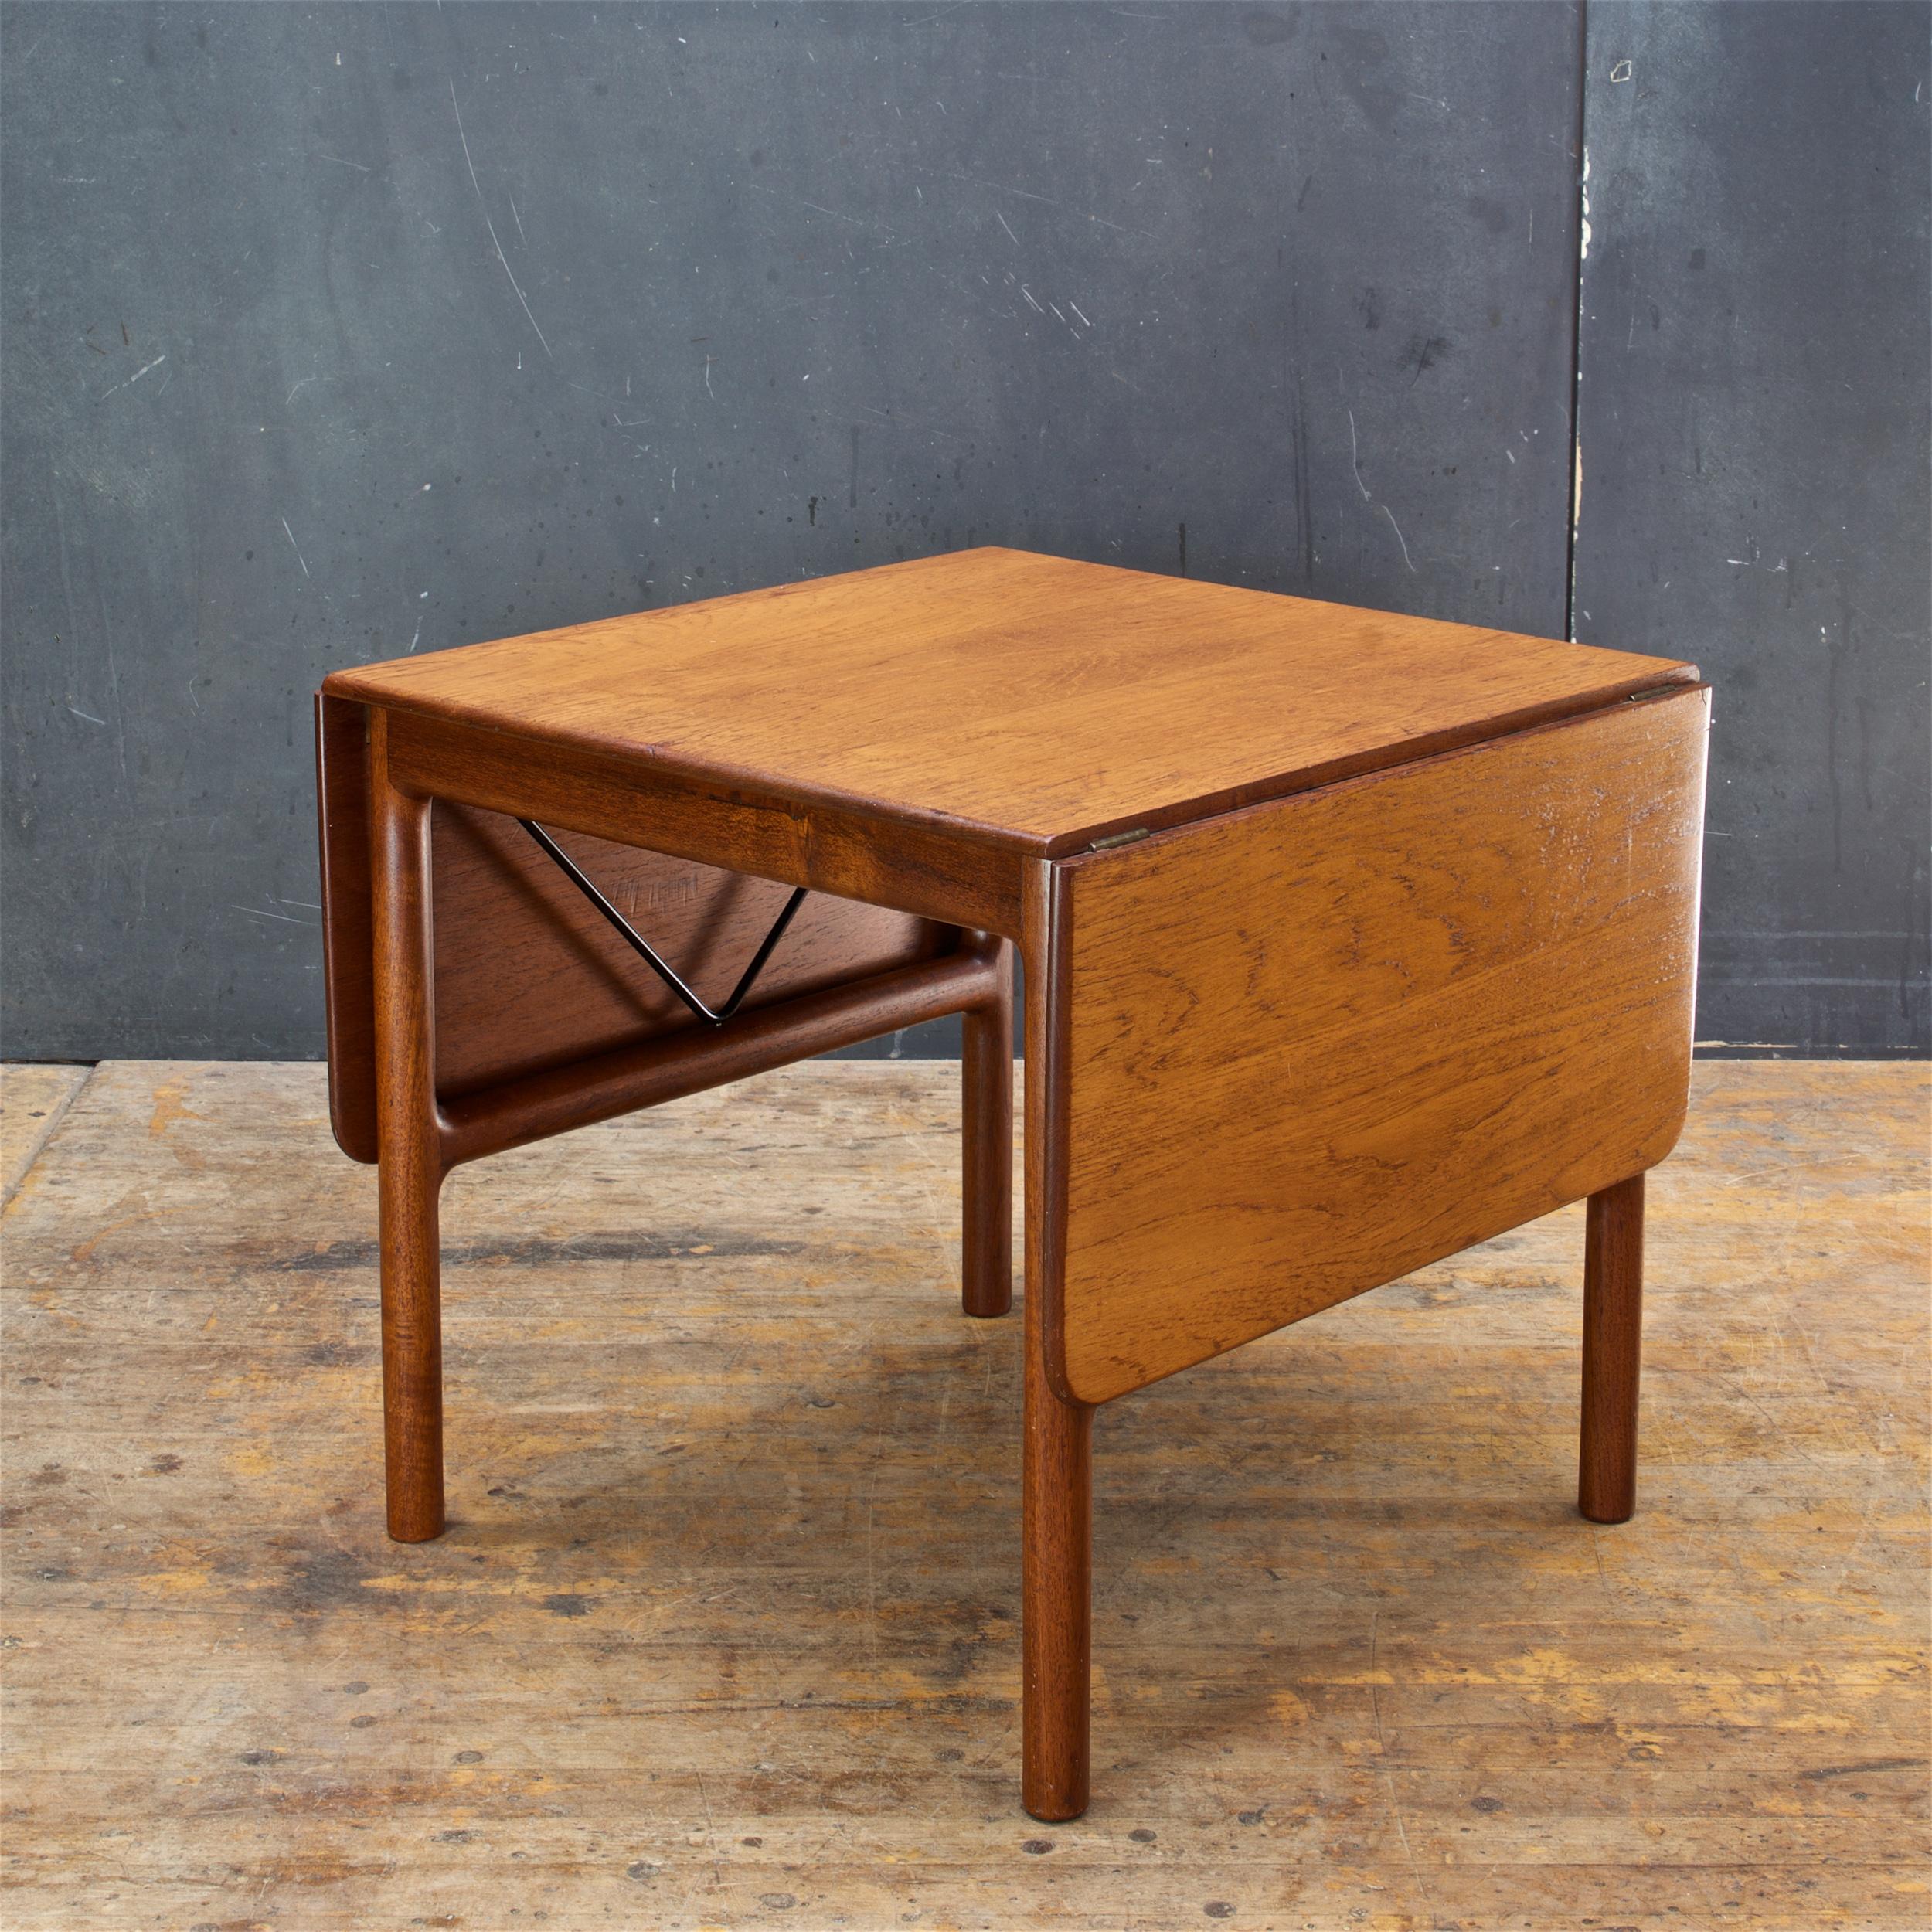 1950s Danish Architects Embassy Drop-Leaf Teak Table in Style of Hans Wegner For Sale 2